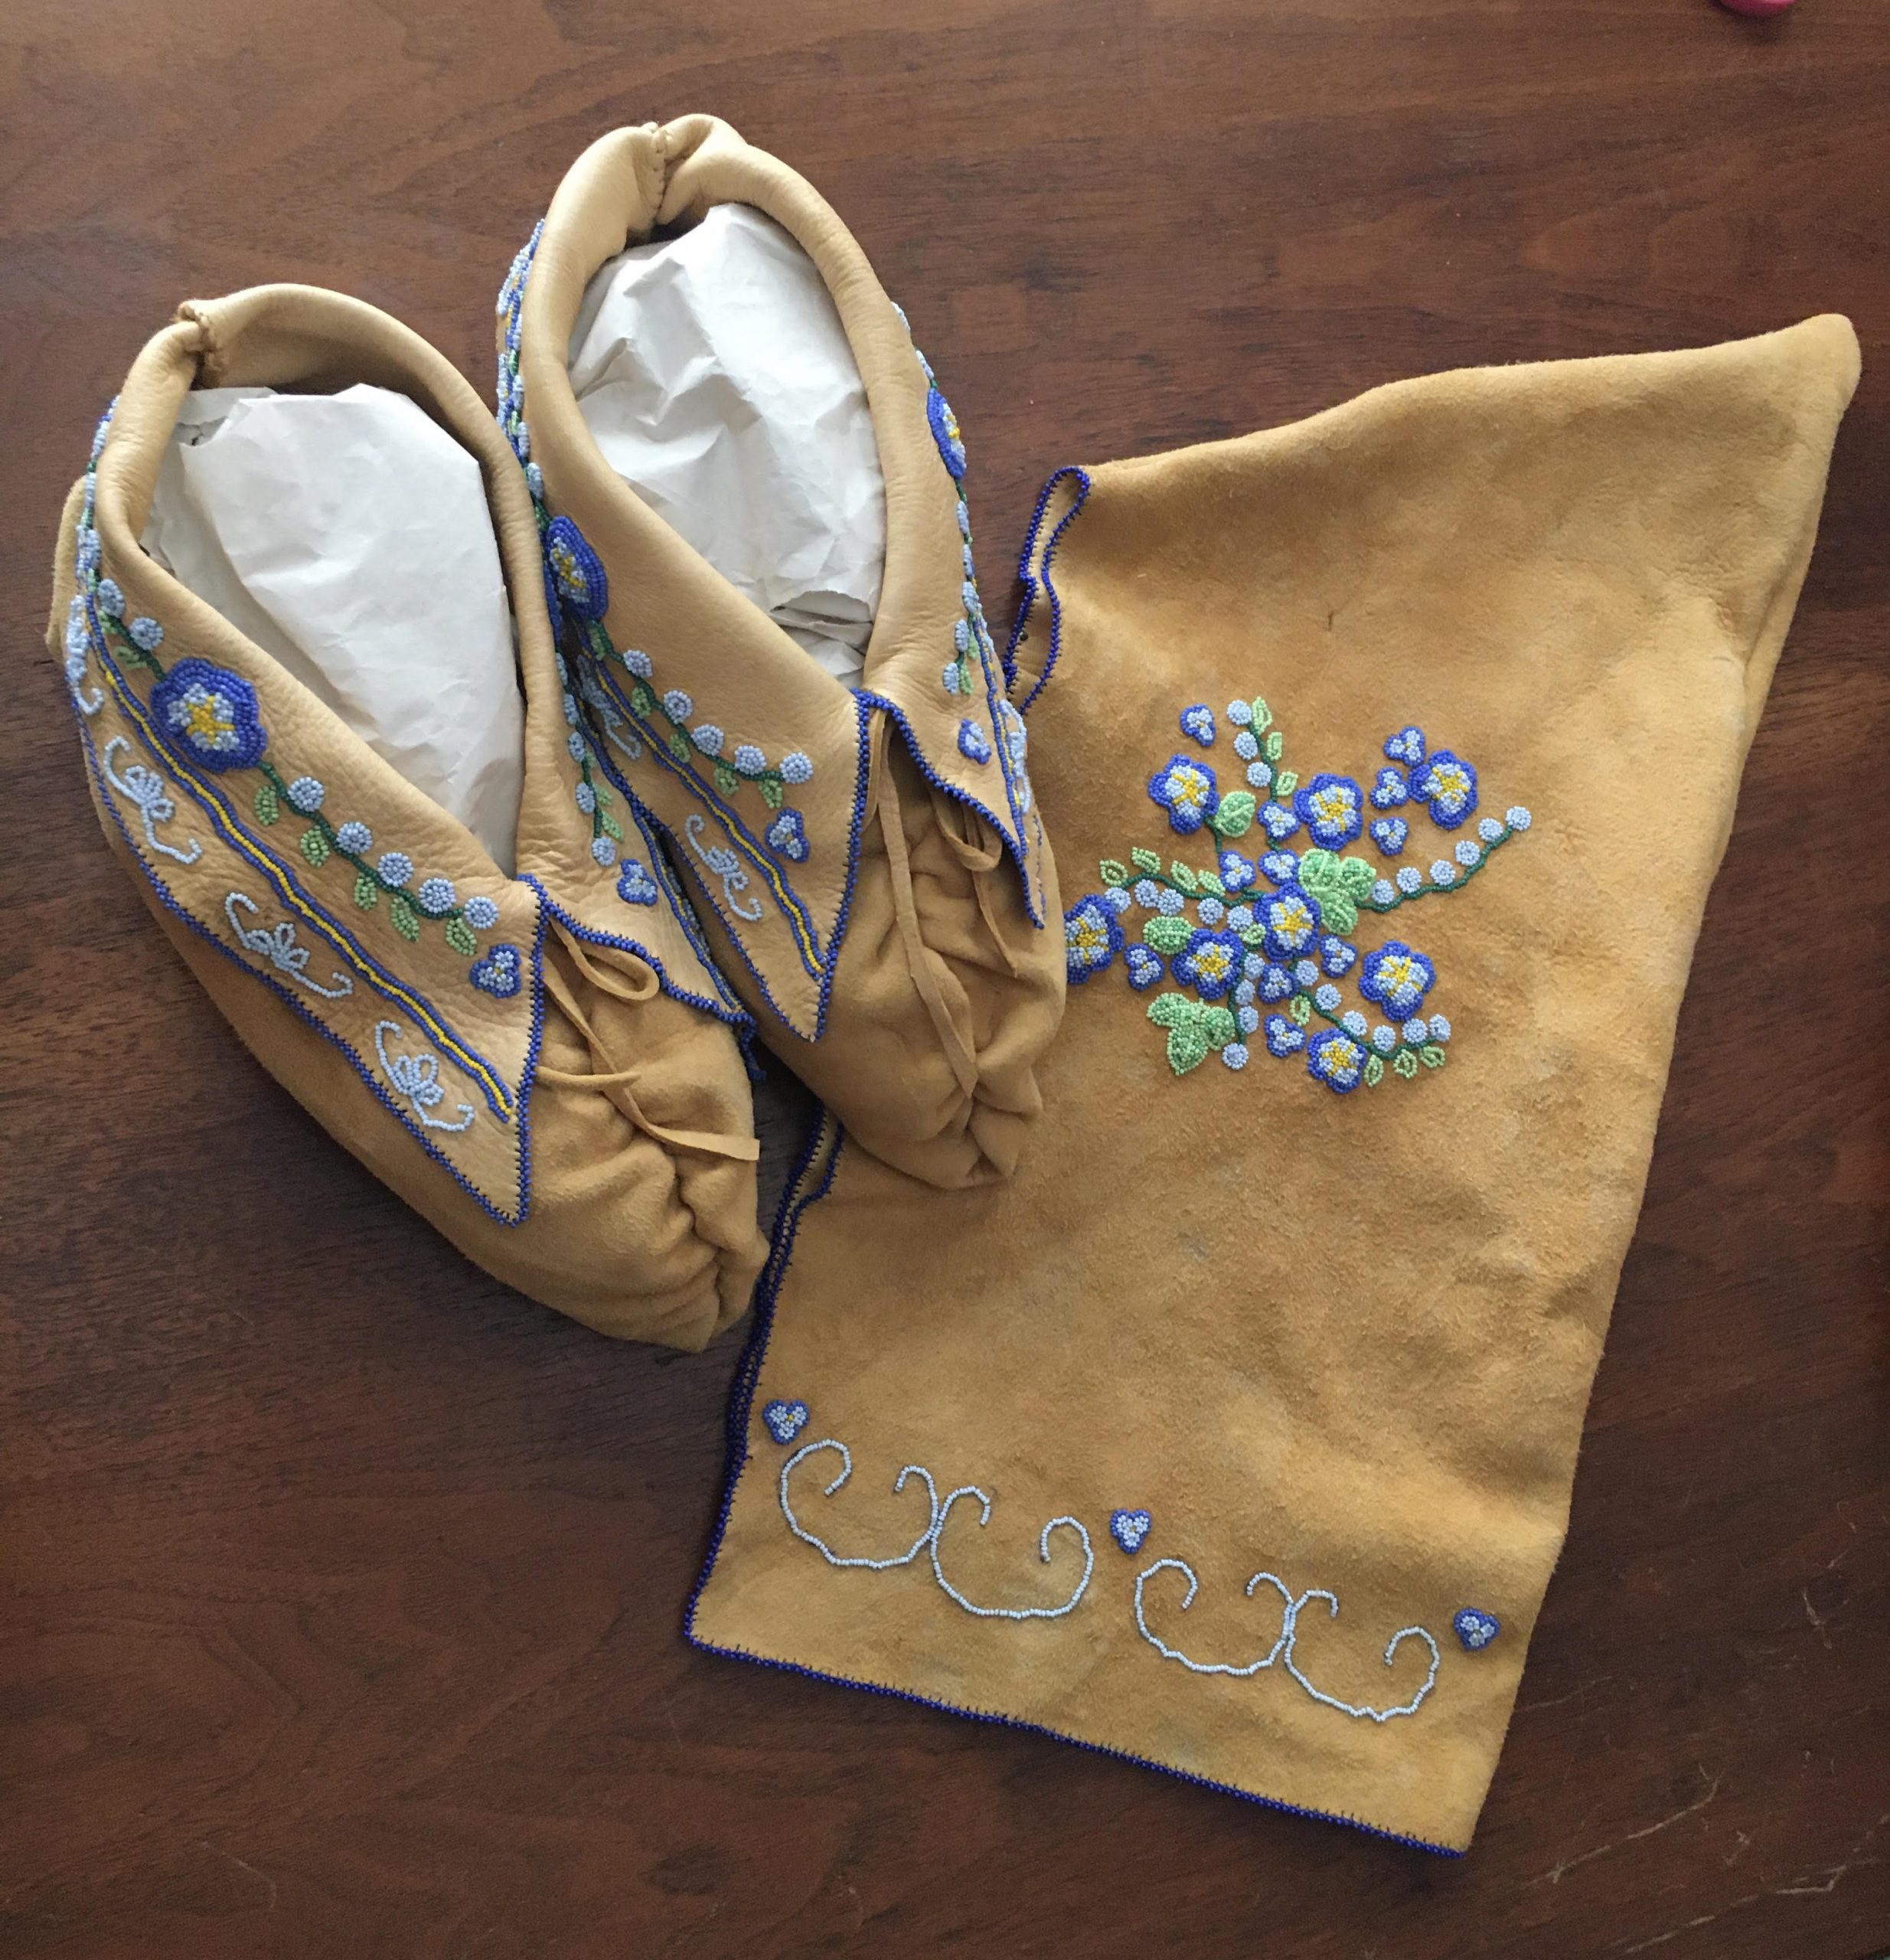 Beaded moccasins and peaked cap made by Francine Poitras Jones